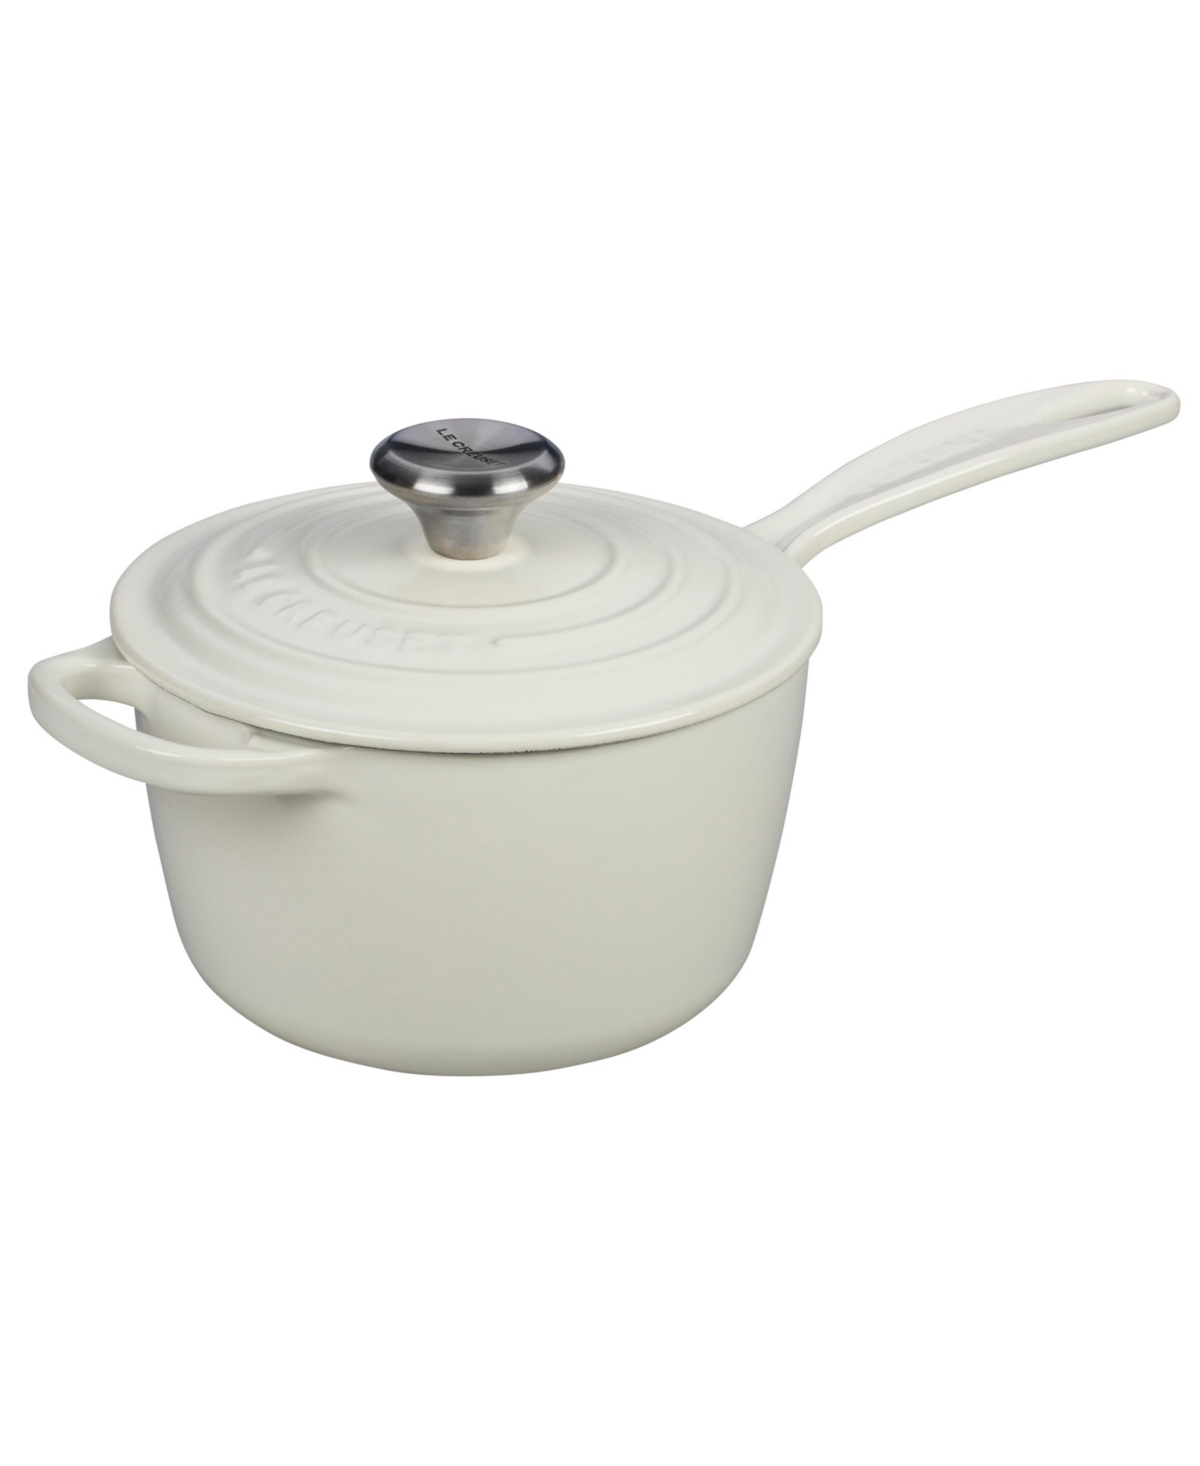 Le Creuset 1.75 Quart Enameled Cast Iron Saucepan With Lid In White